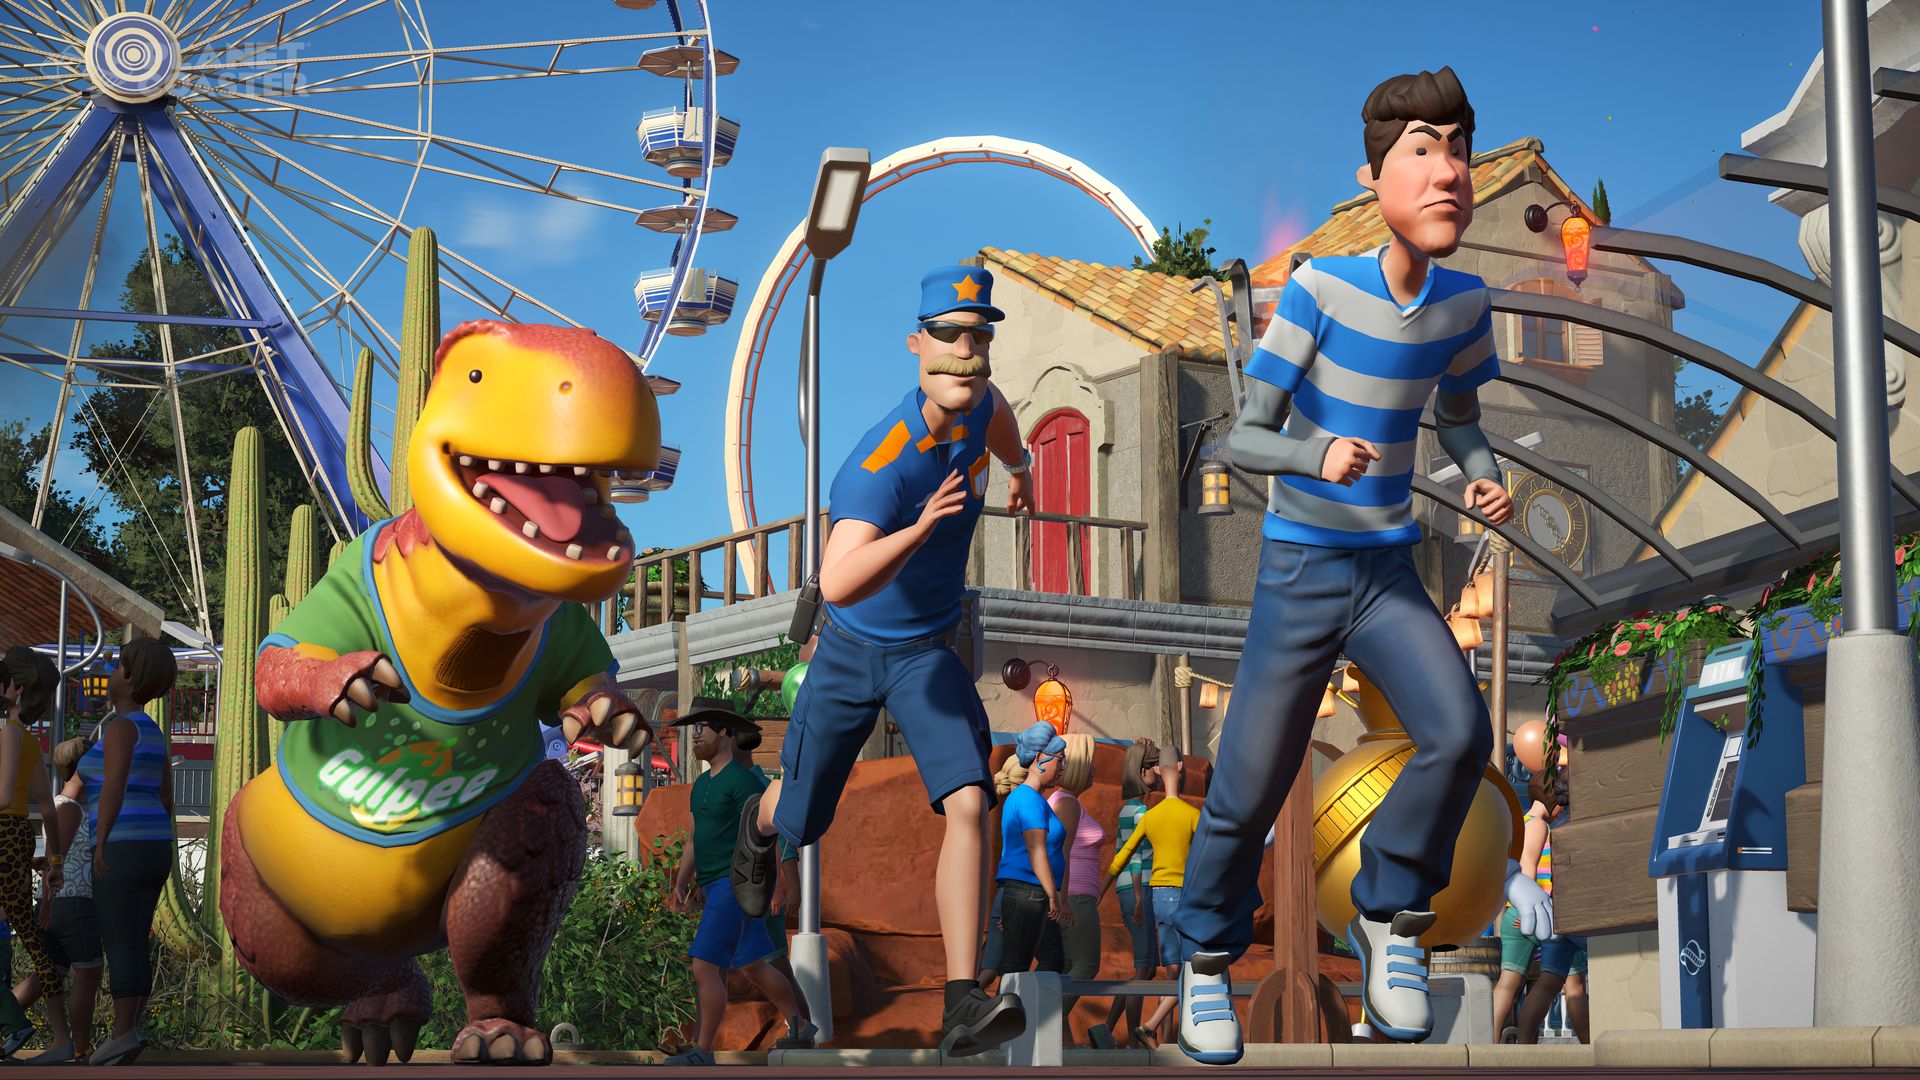 Planet Coaster: Complete The Collection Bundle Steam Account